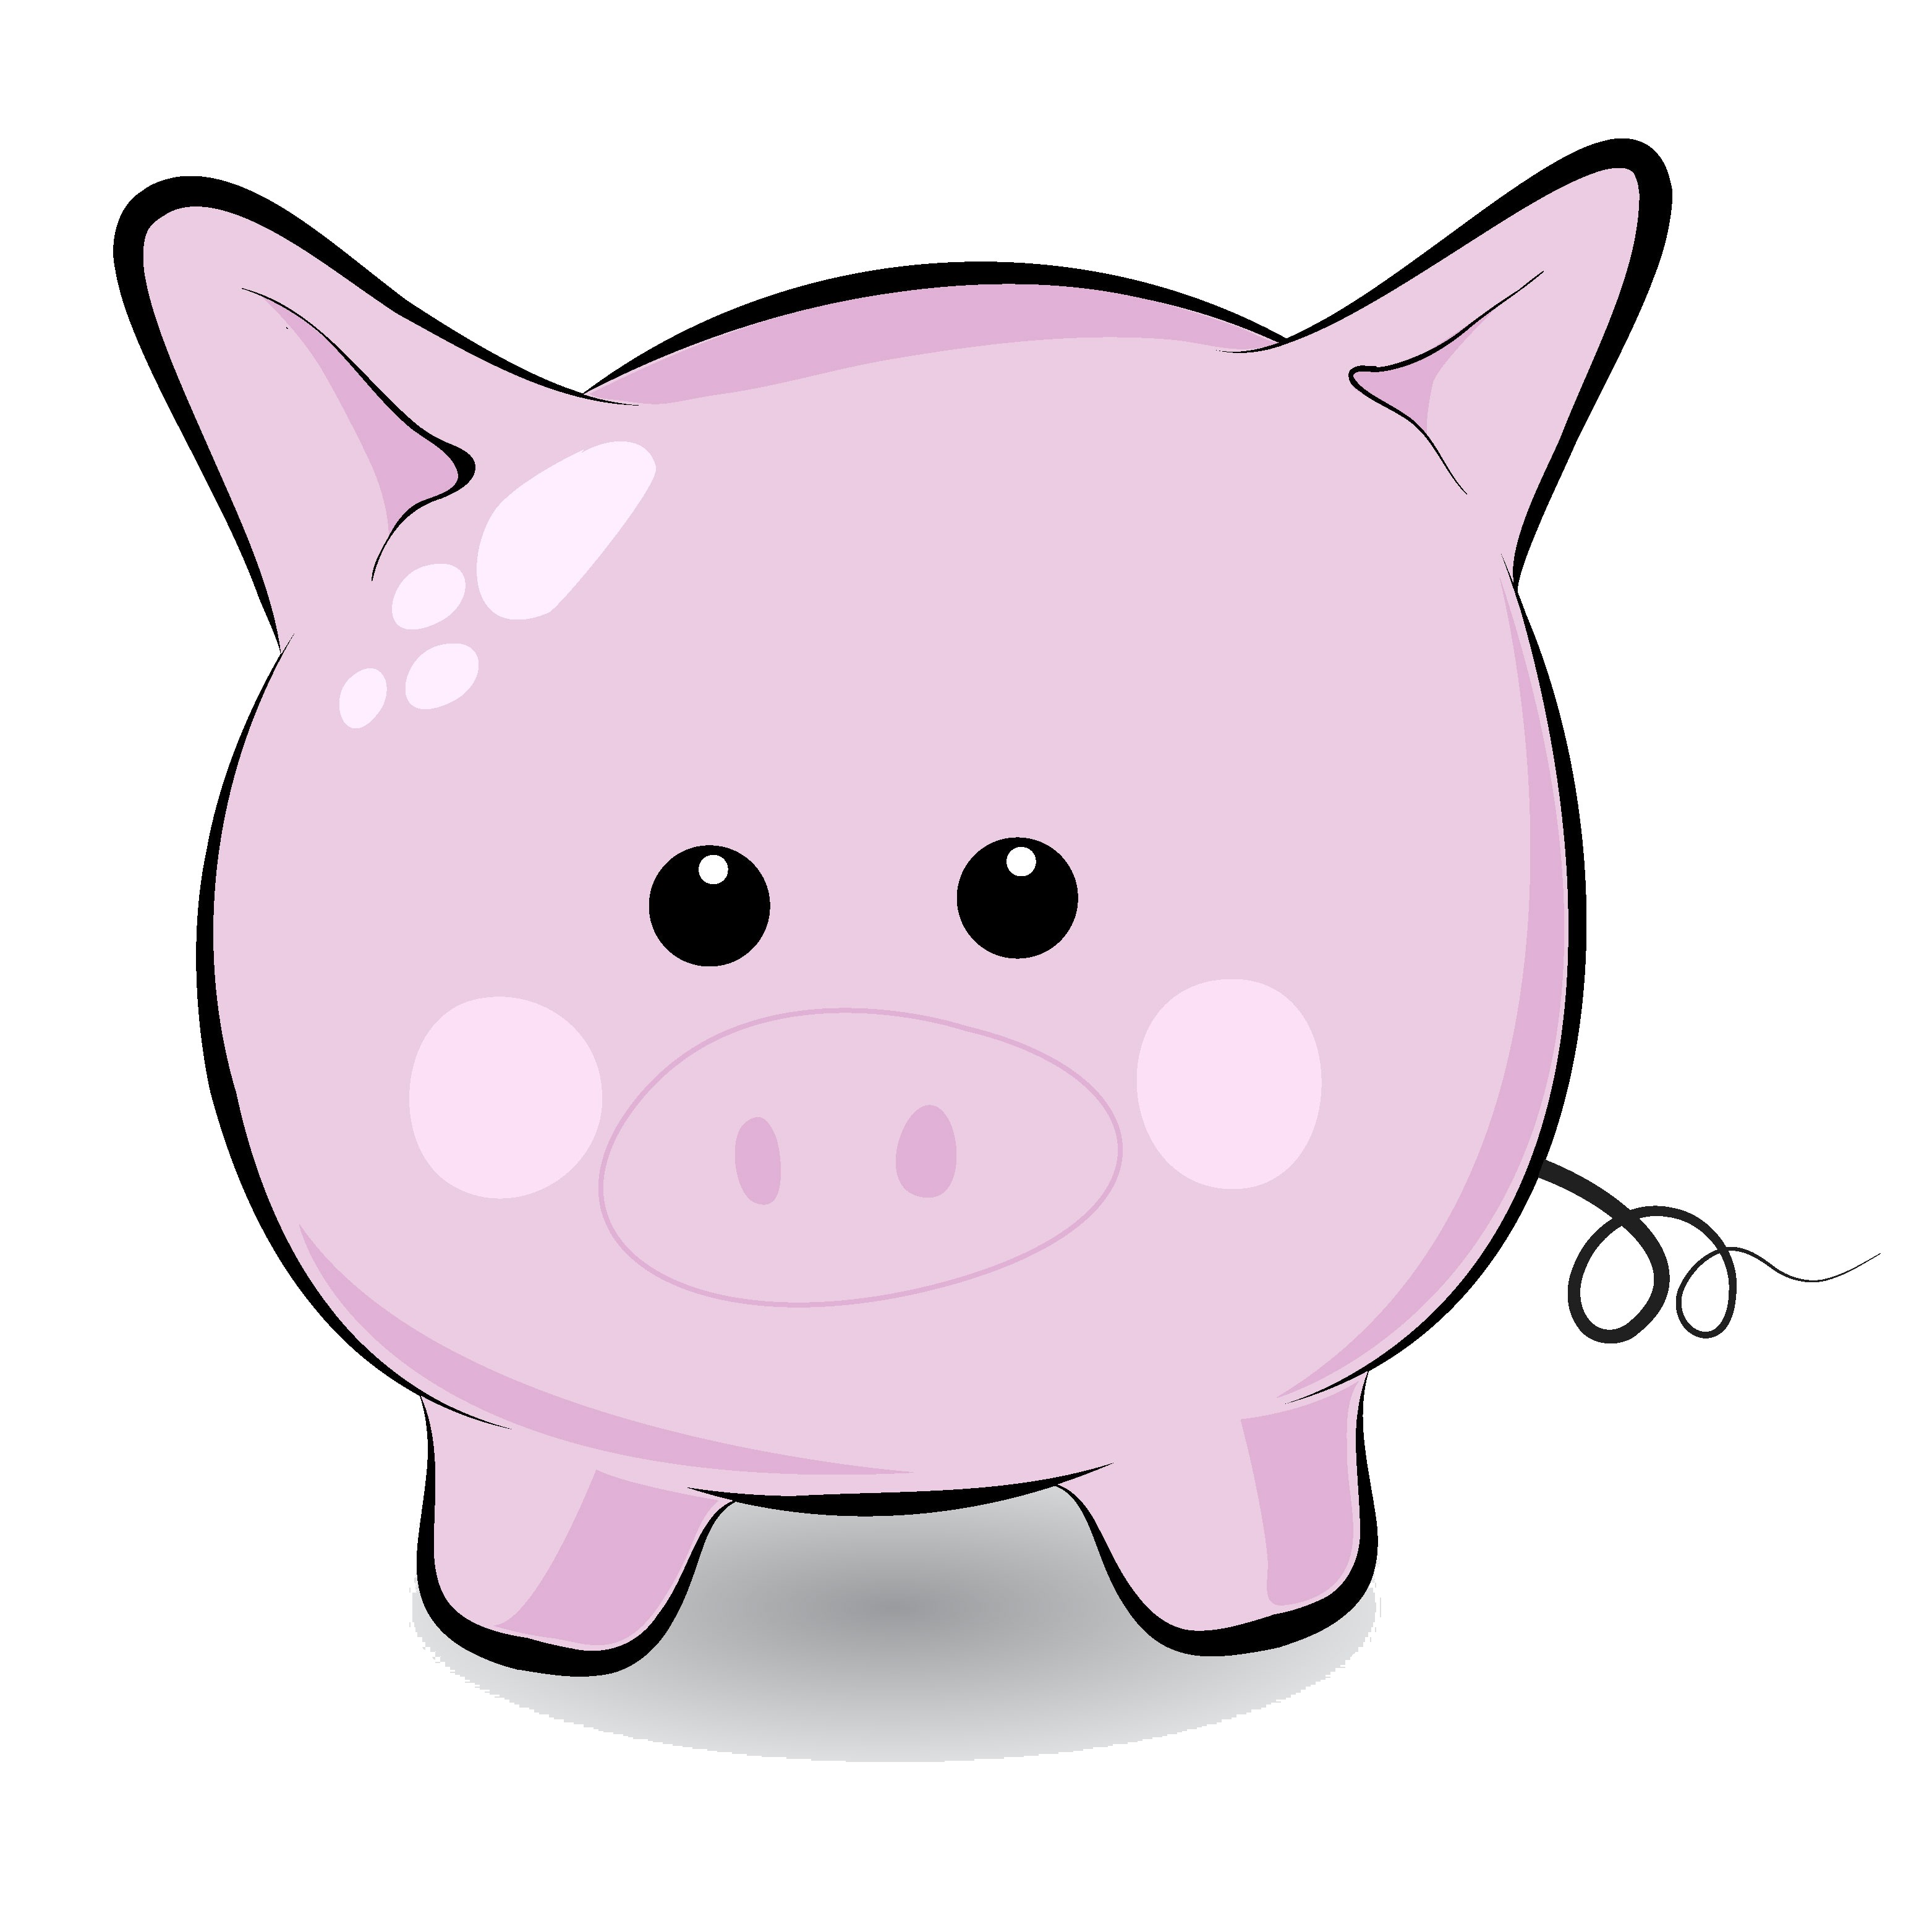 Pig Clipart Black And White   Clipart Panda   Free Clipart Images